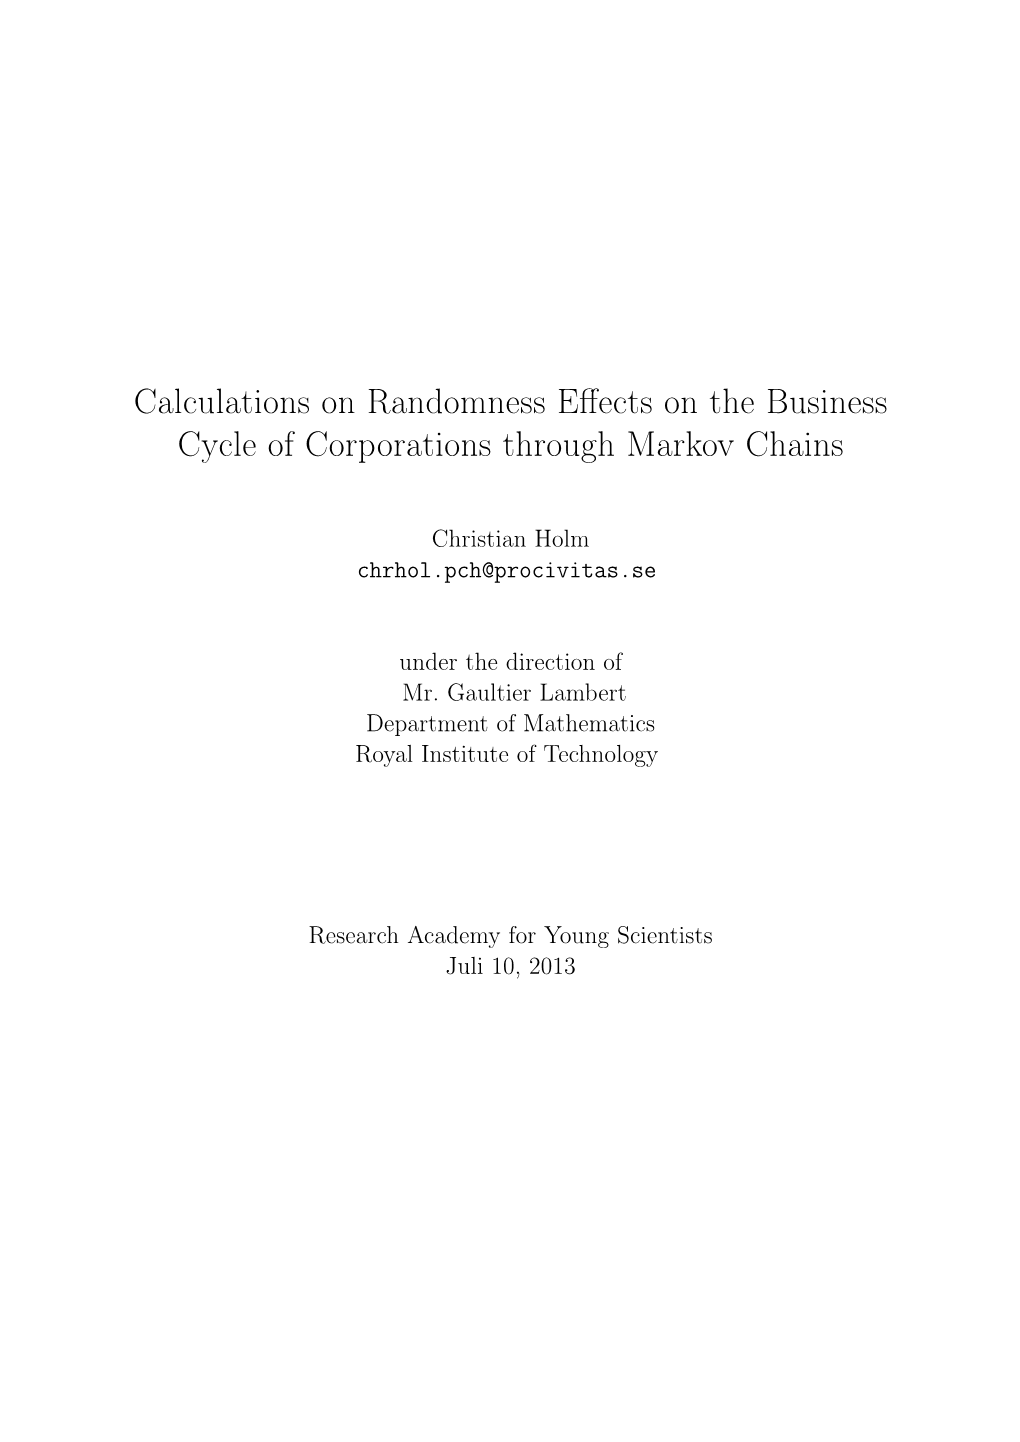 Calculations on Randomness Effects on the Business Cycle Of